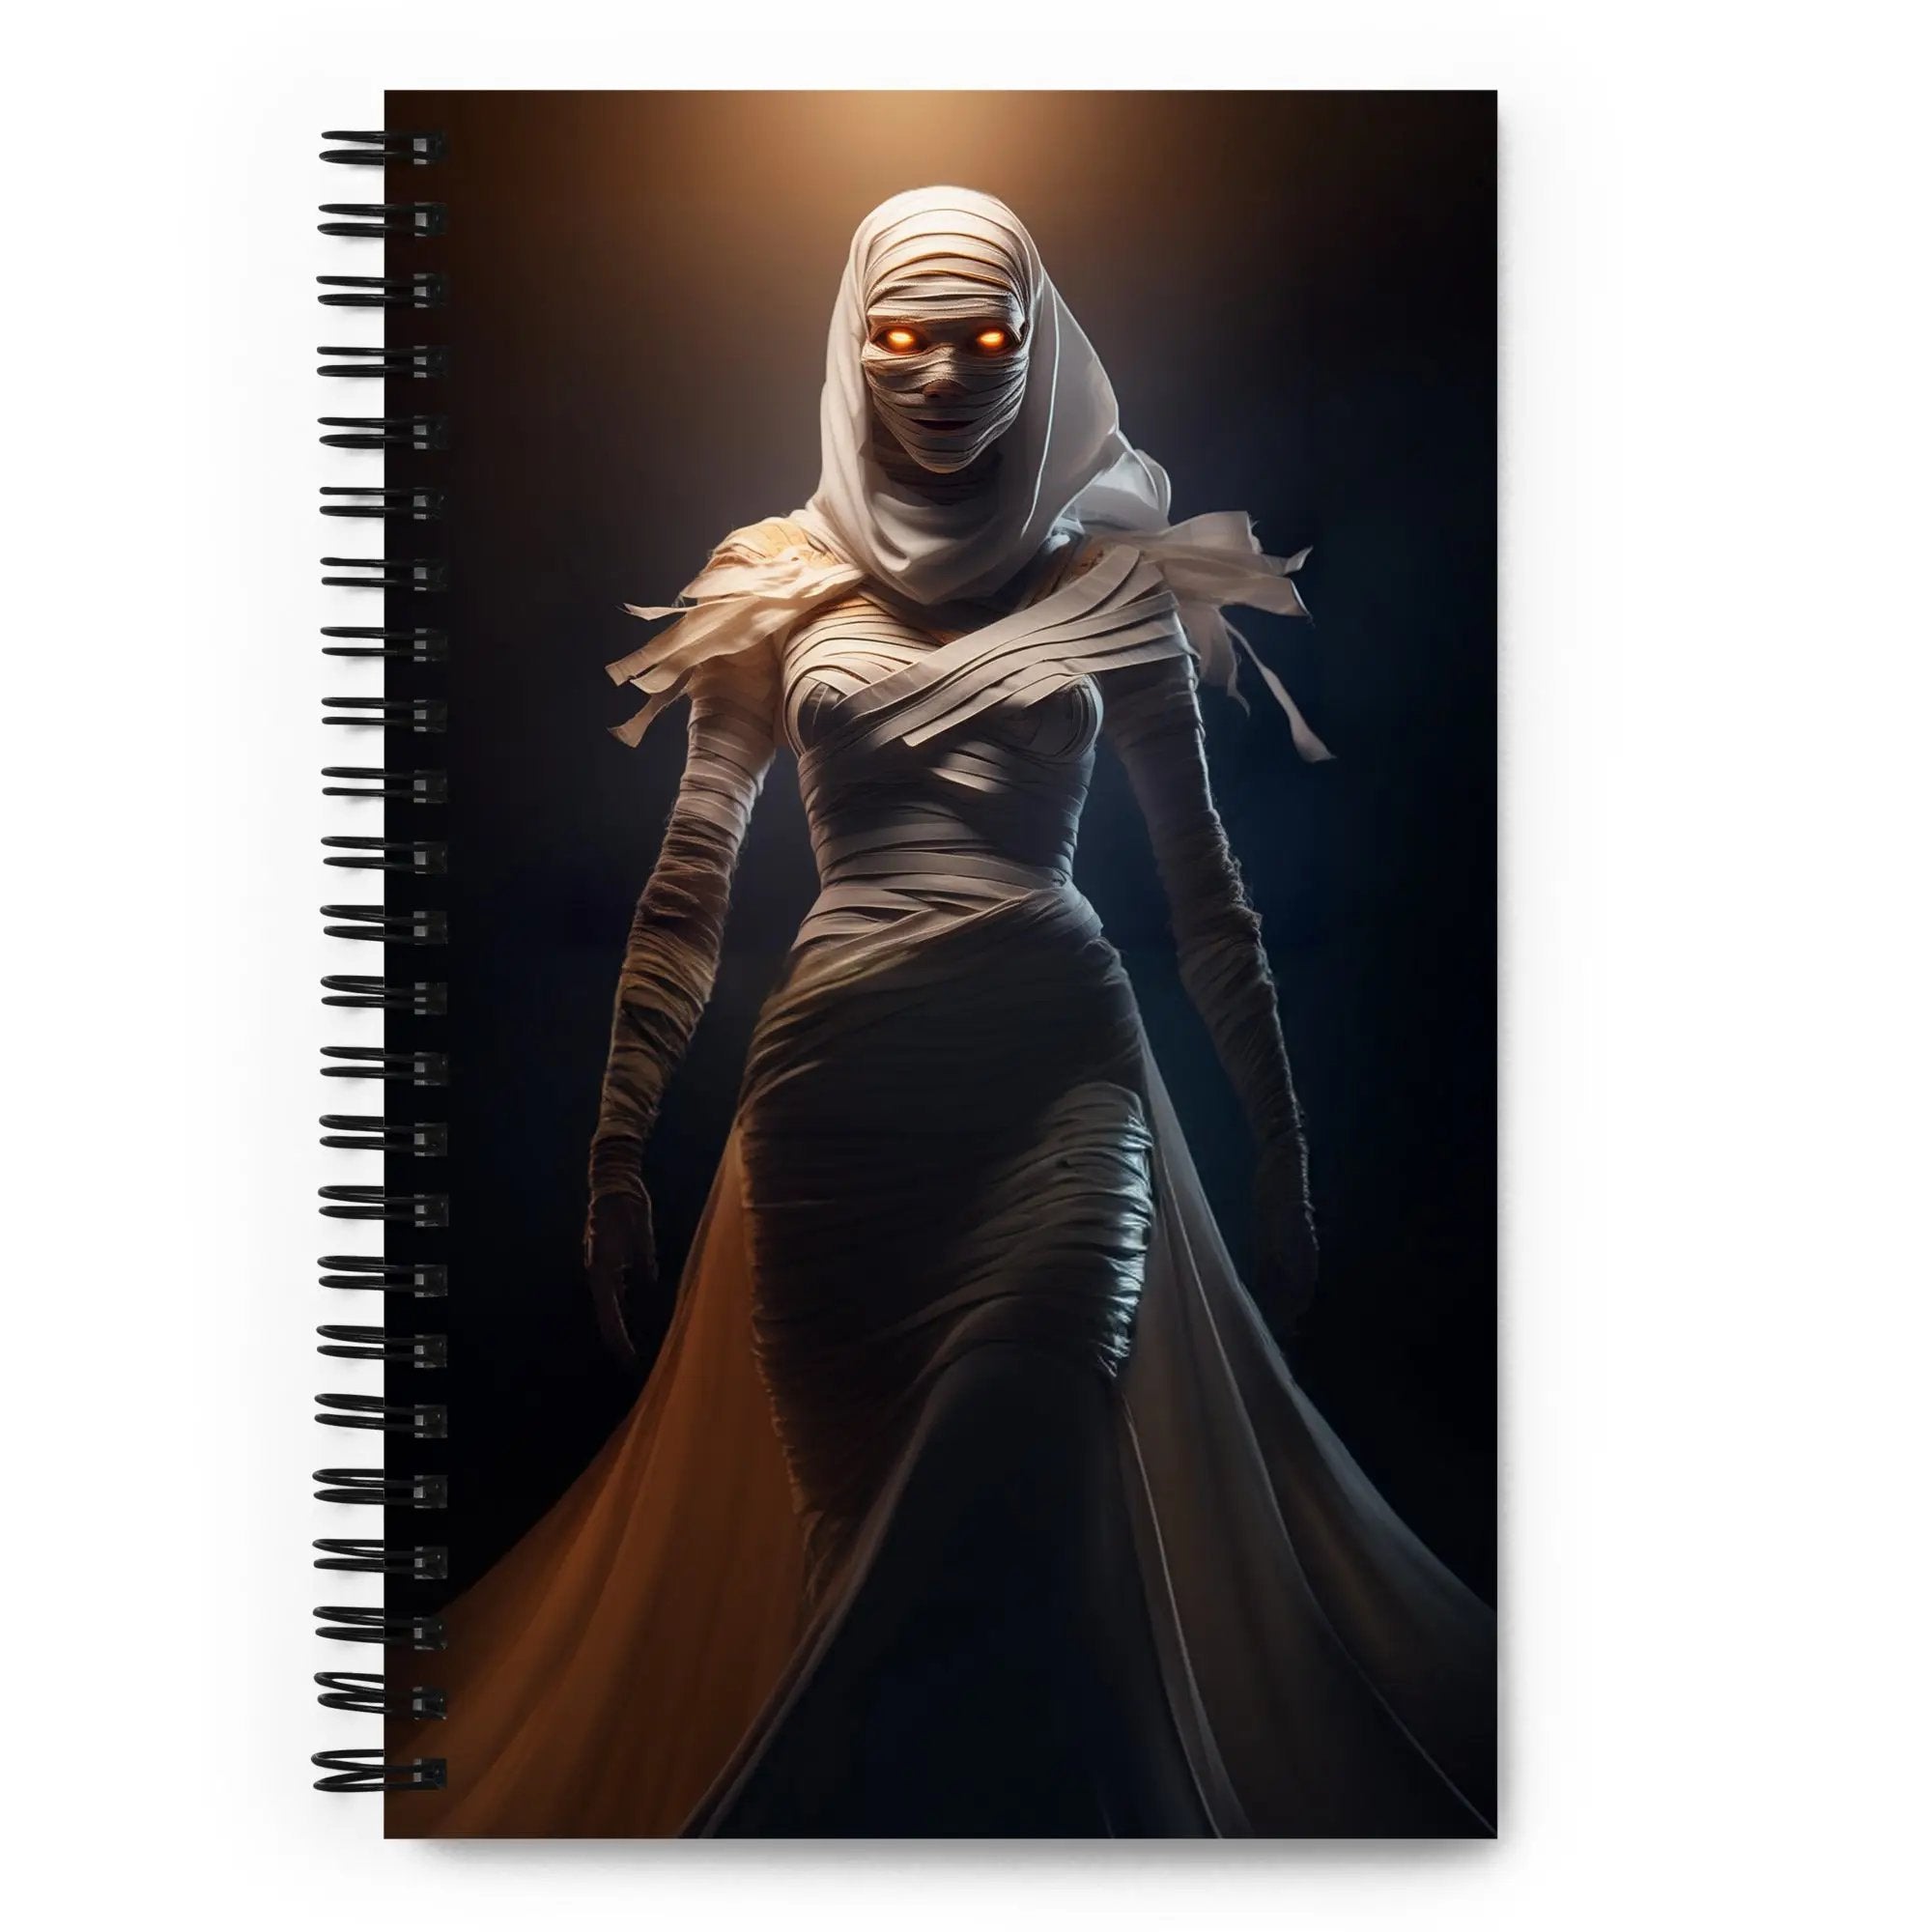 The Monster Squad "The Mummy" Spiral notebook